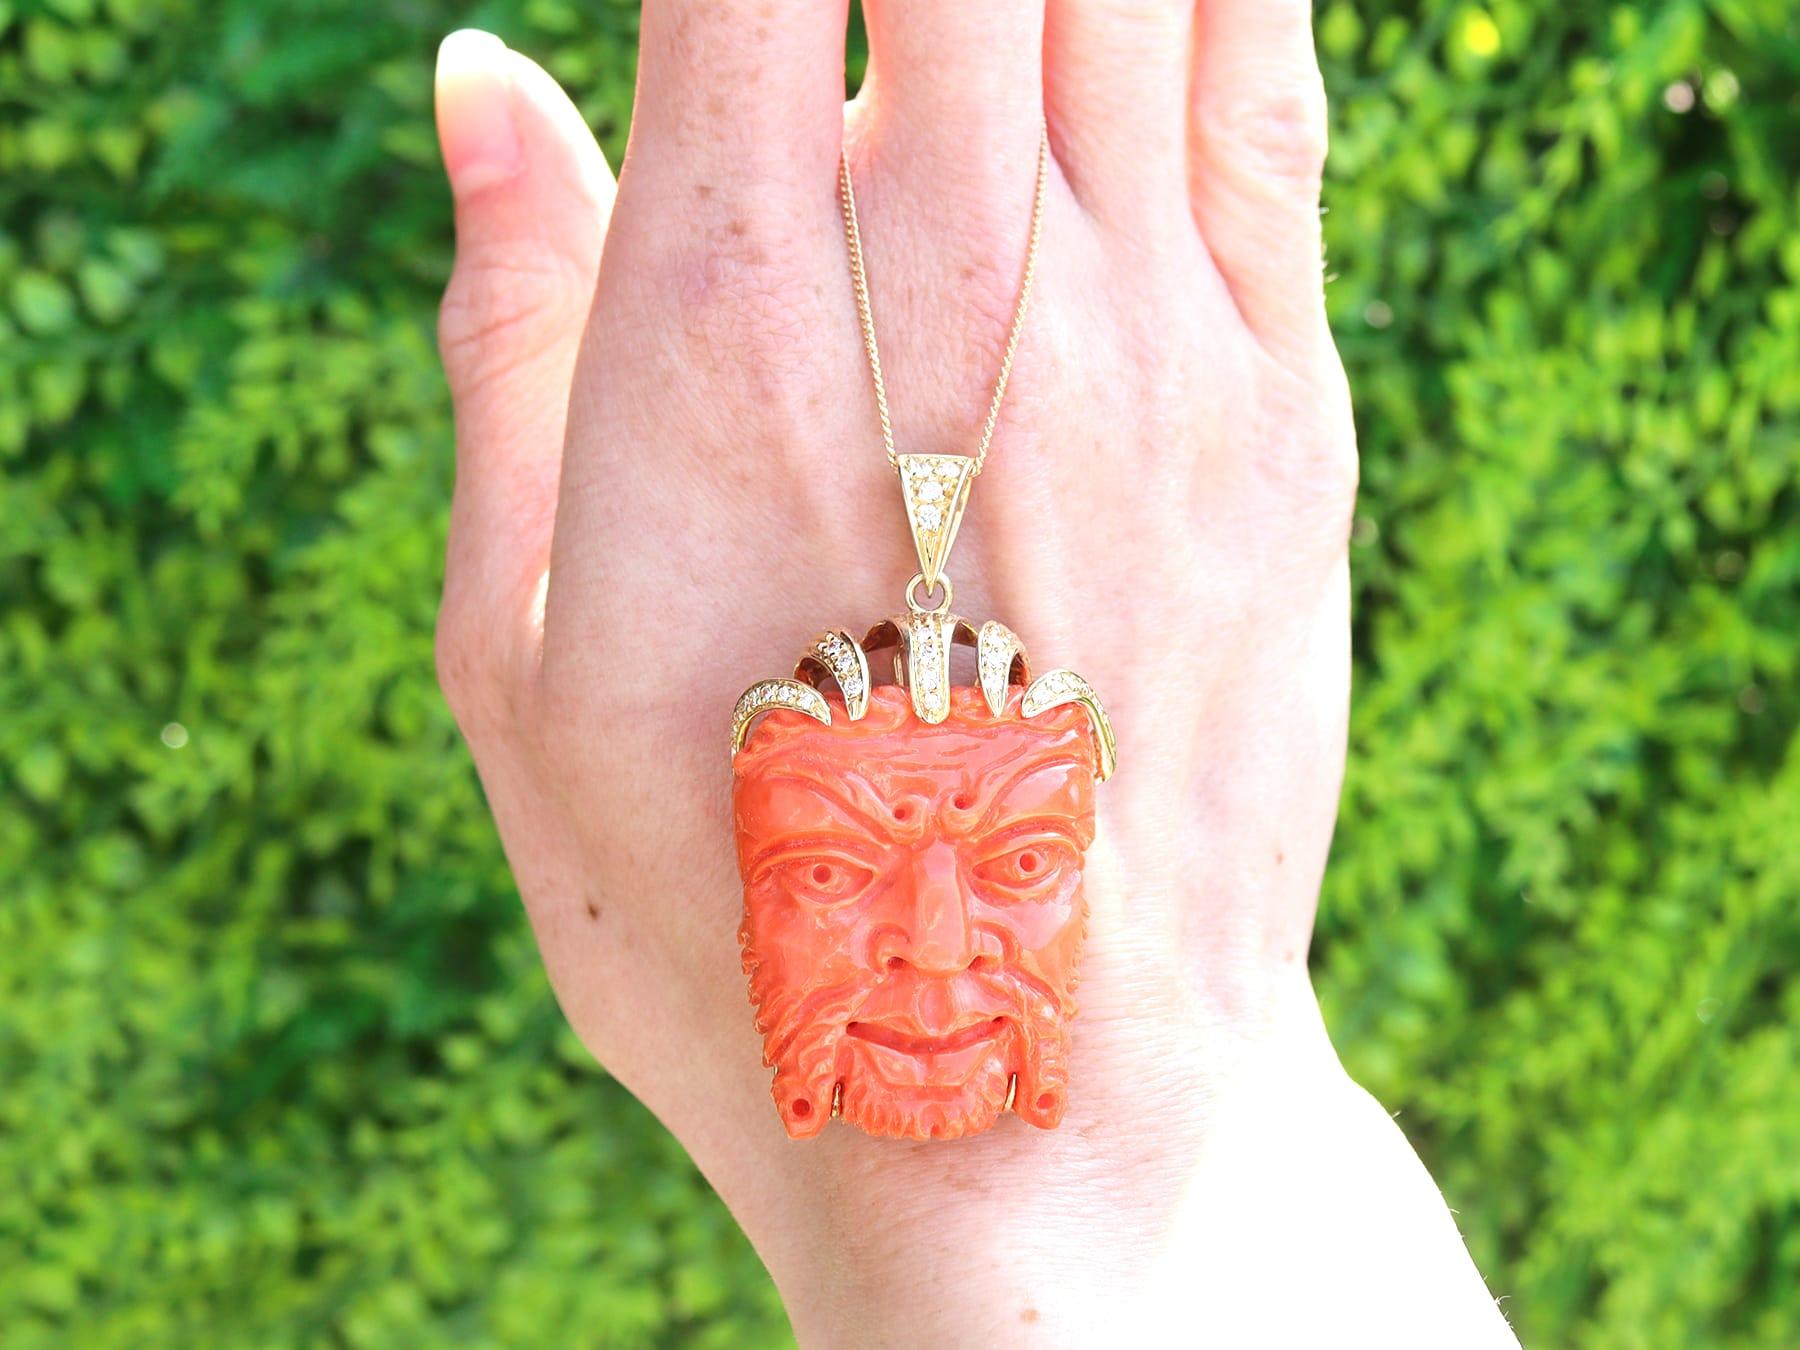 A stunning, fine and impressive vintage 112 carat coral and 0.29 carat diamond, 18 karat yellow gold grotesque mask pendant; part of our diverse vintage jewellery and estate jewelry collections.

This fine and impressive vintage pendant has been